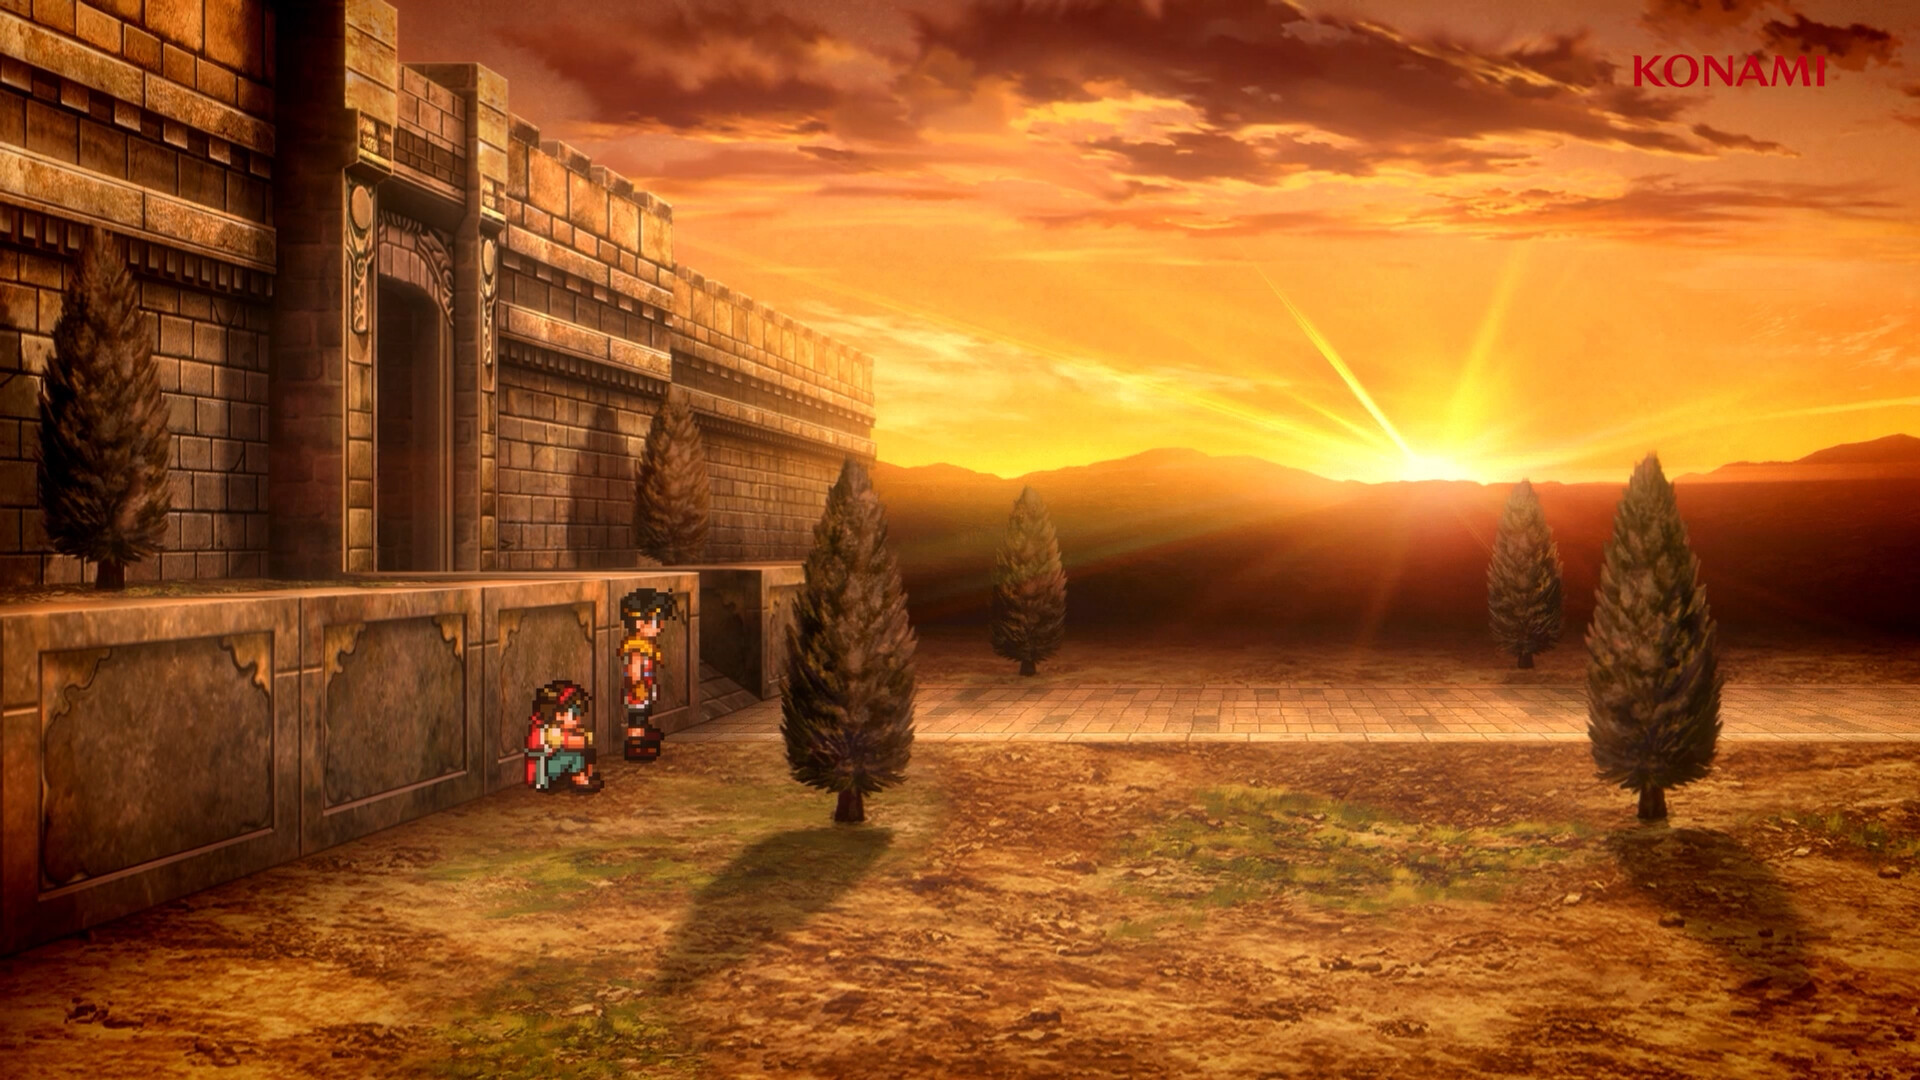 Suikoden I & II HD Remaster Gate Rune and Dunan Unification Wars Now Age-Rated in Taiwan